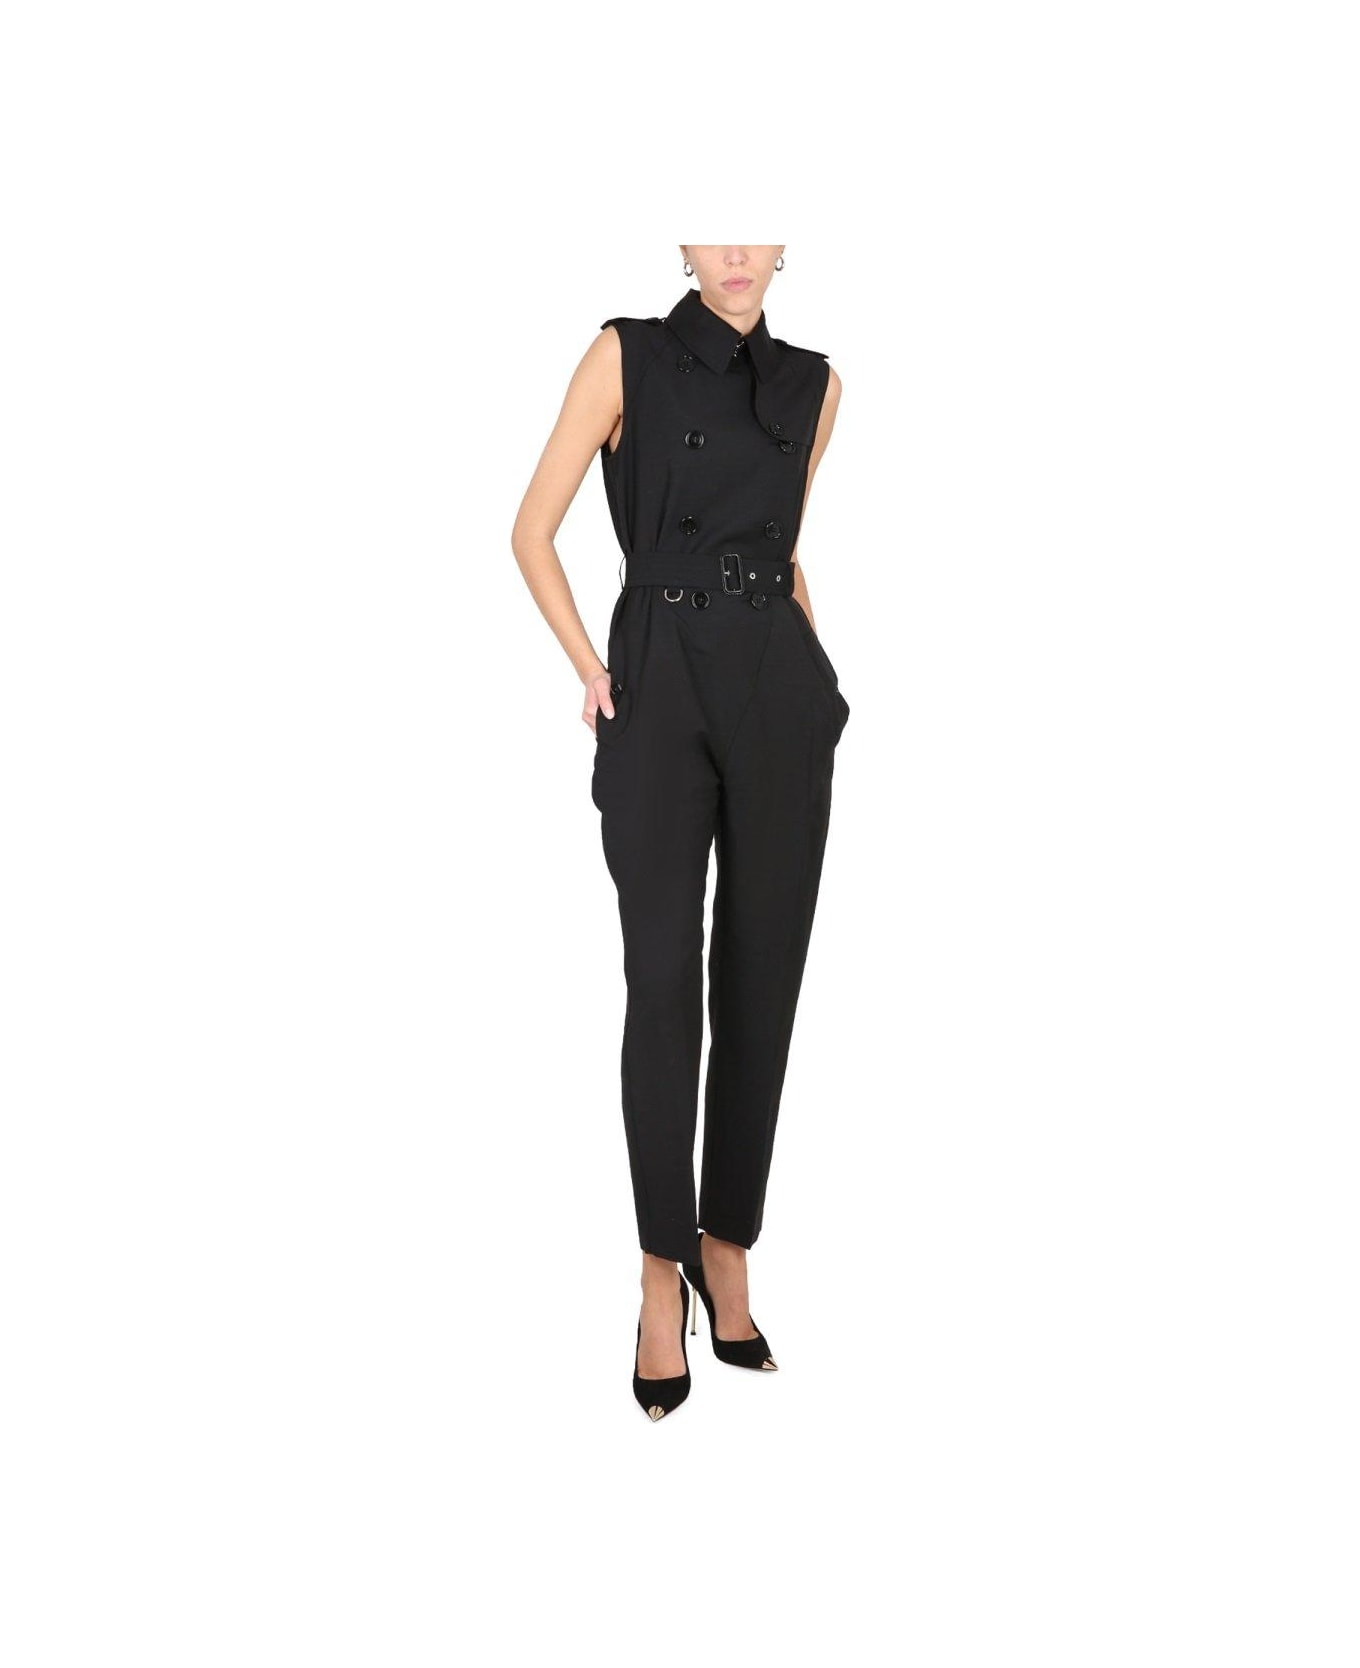 Burberry Double Breasted Belted Waist Overalls - BLACK ジャンプスーツ